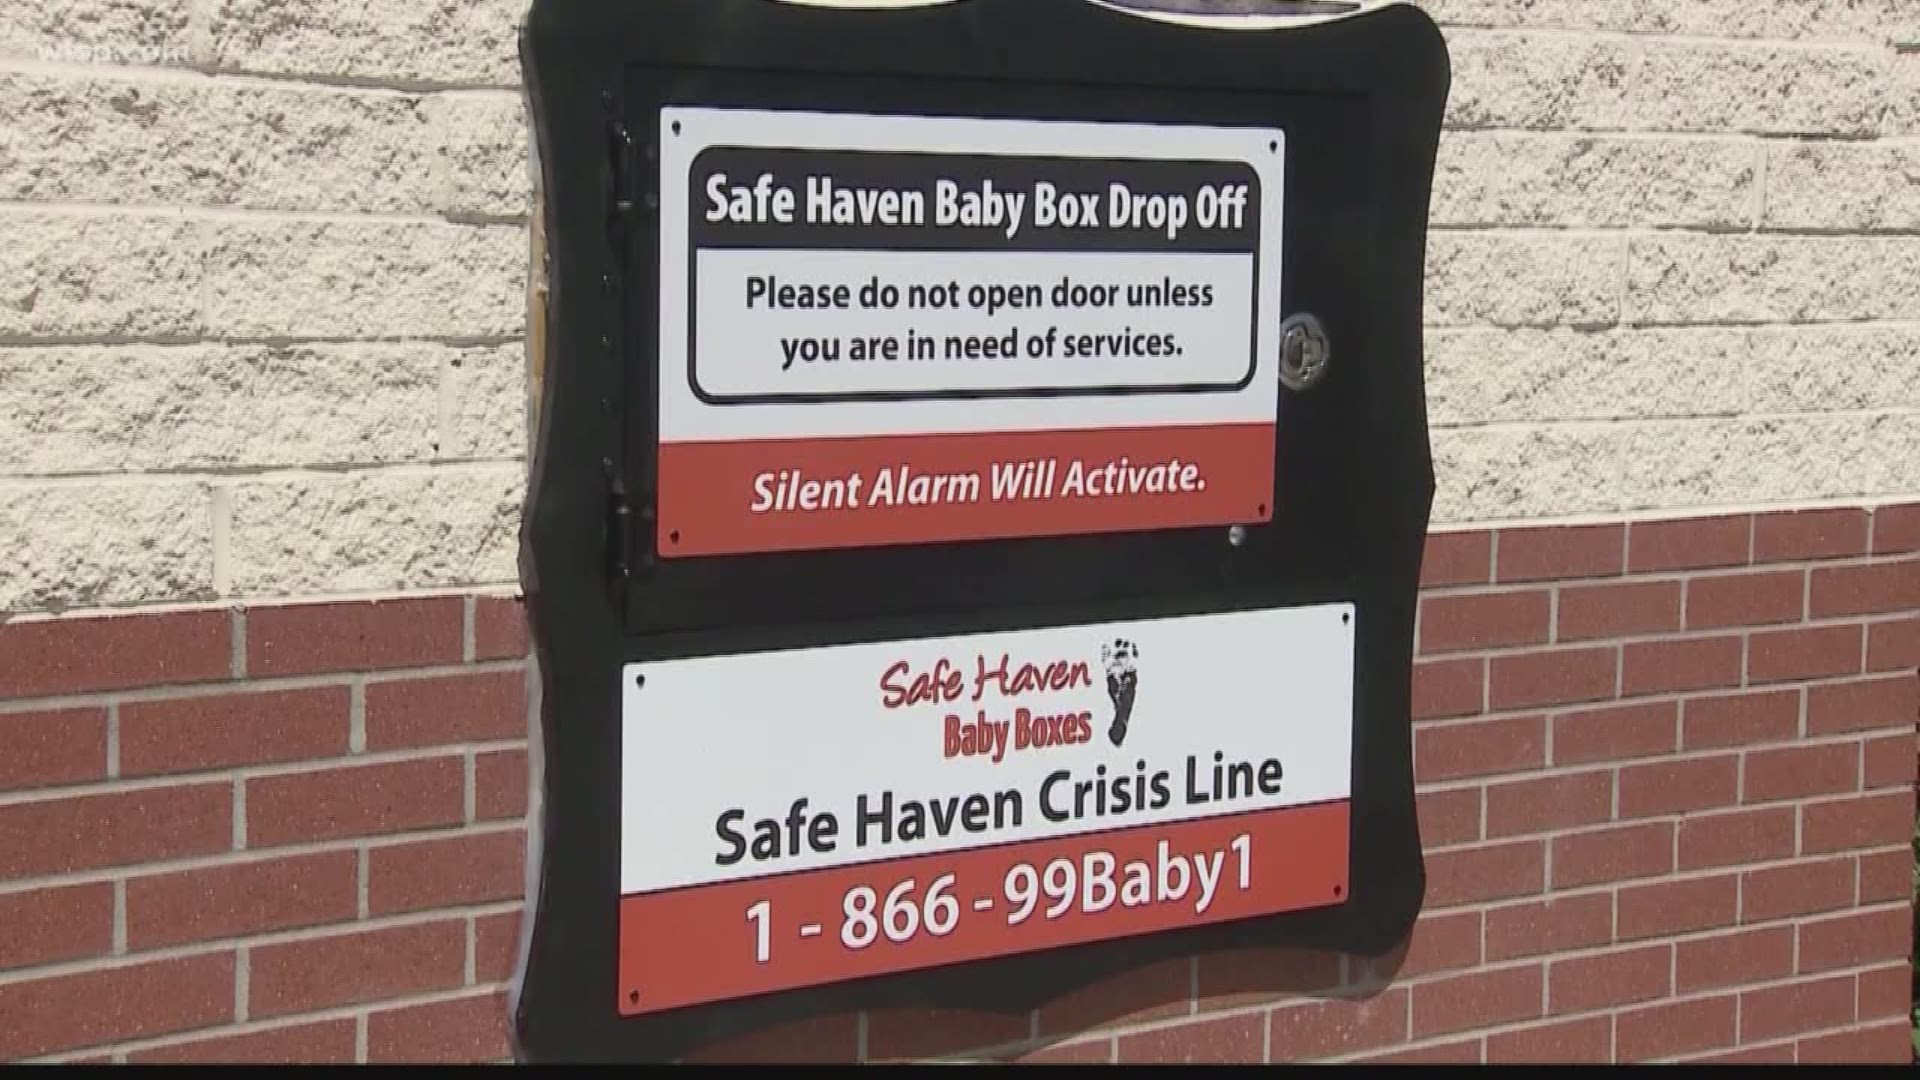 Mothers in crisis can safely, securely, and anonymously surrender her unwanted babies.